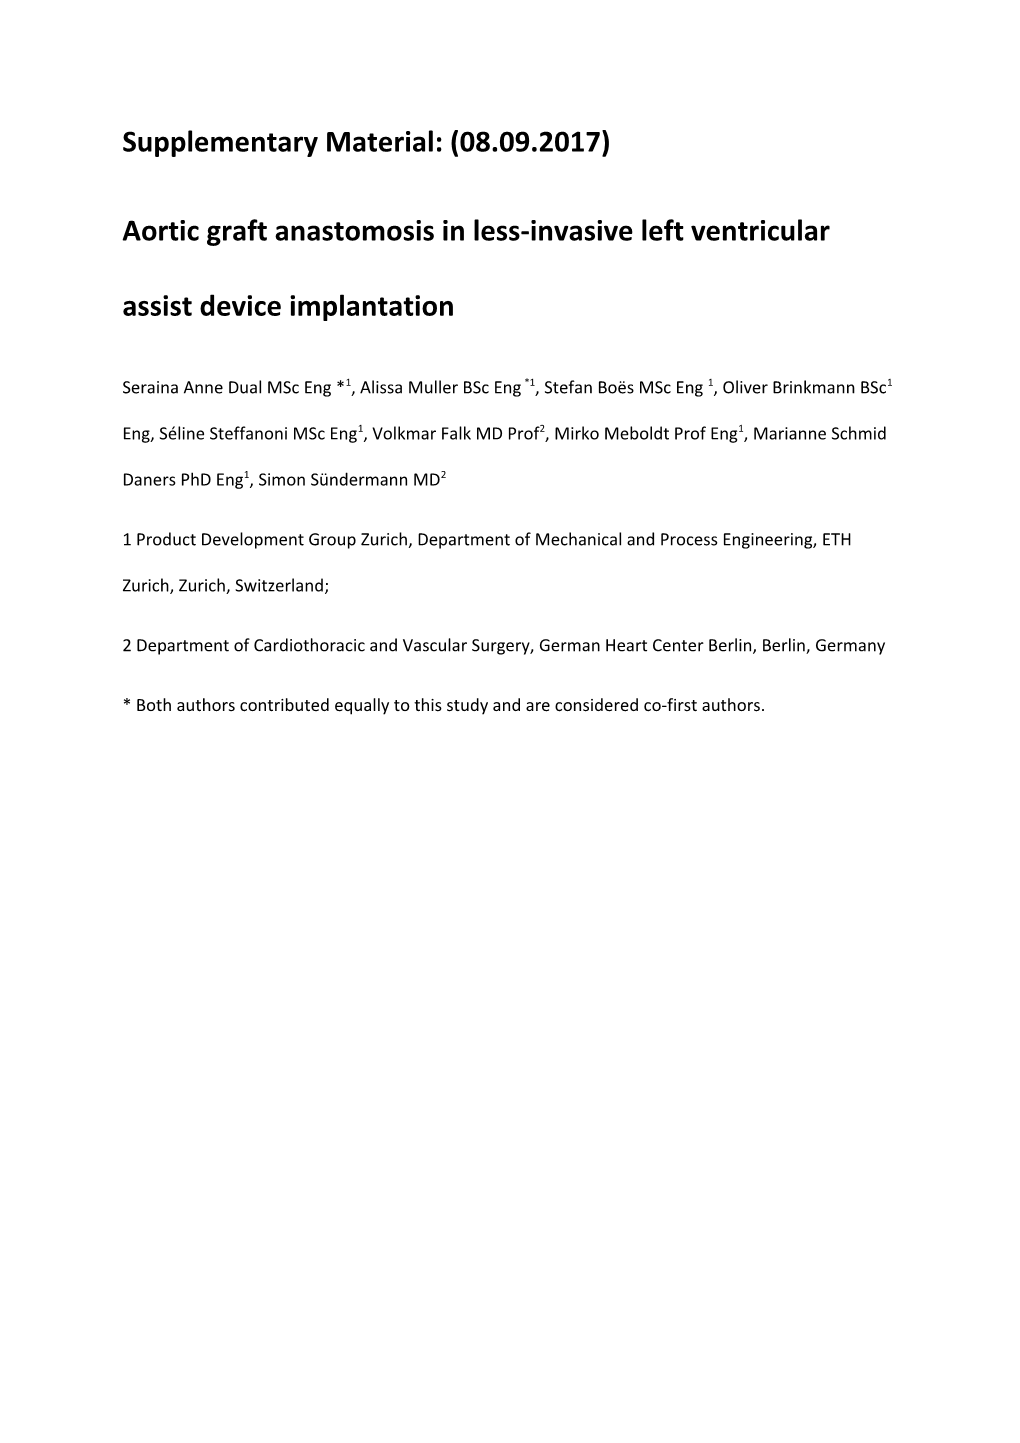 Aortic Graft Anastomosis in Less-Invasive Left Ventricular Assist Device Implantation